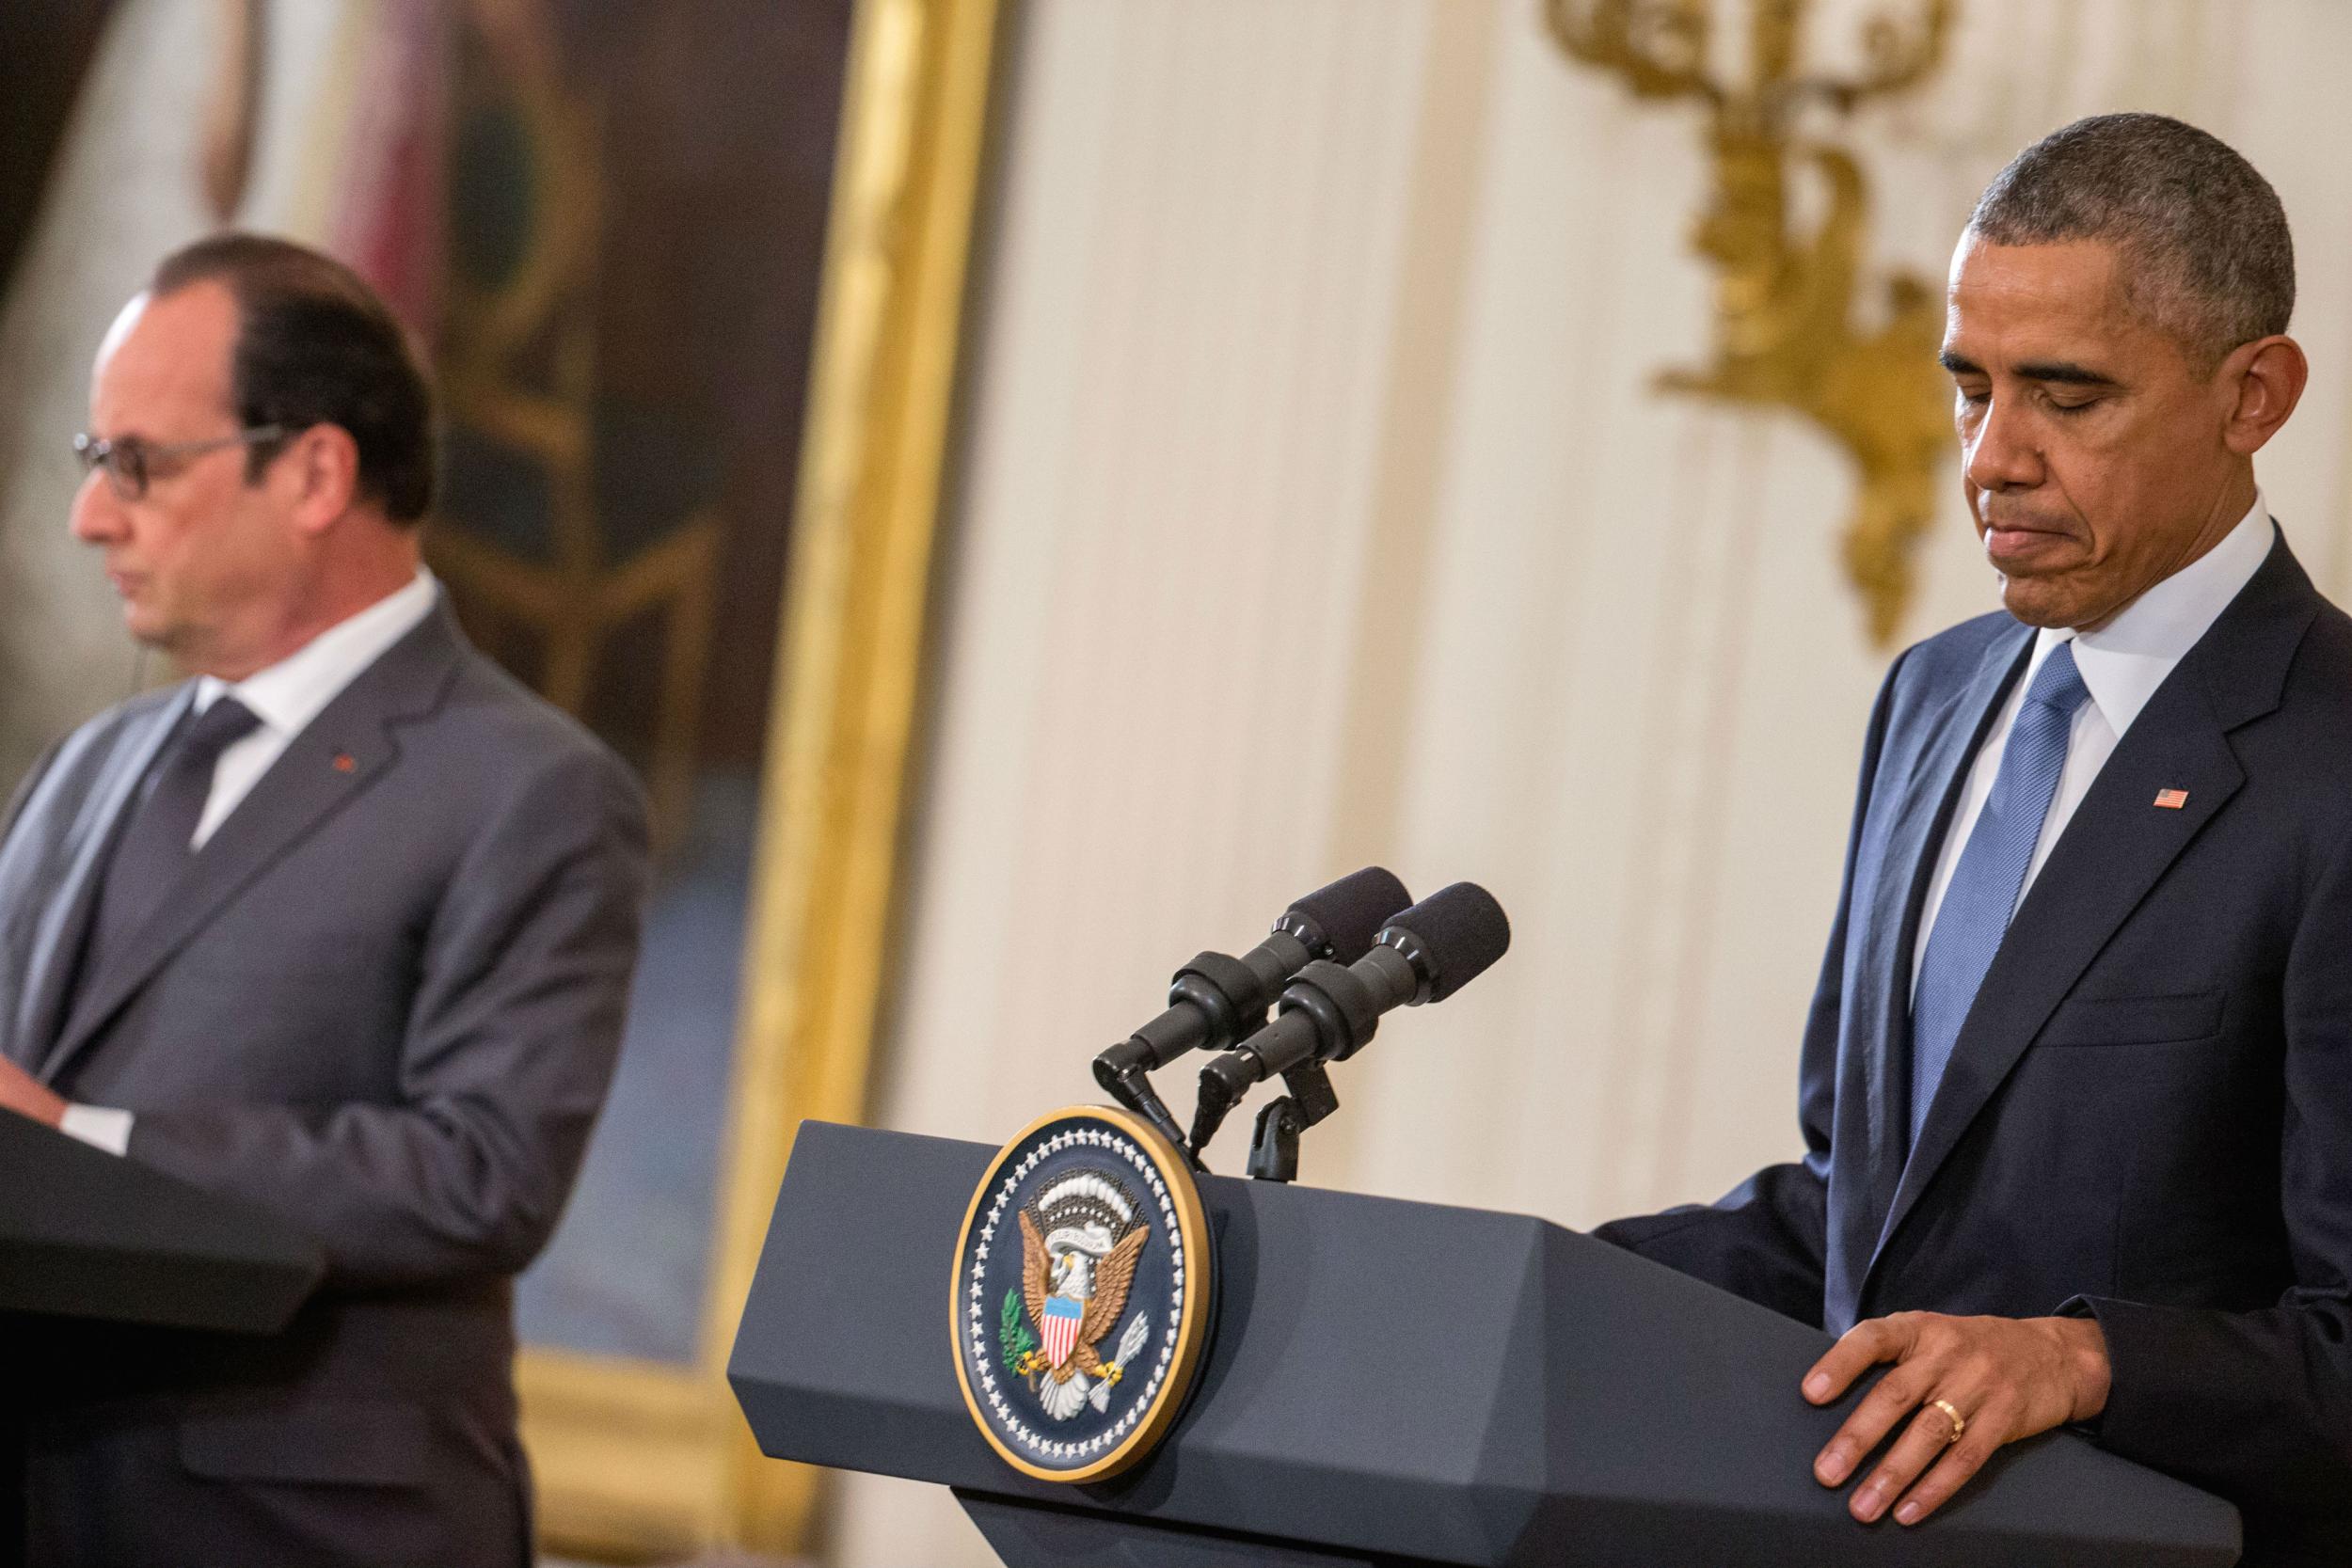 Hollande and Obama spoke at the White House